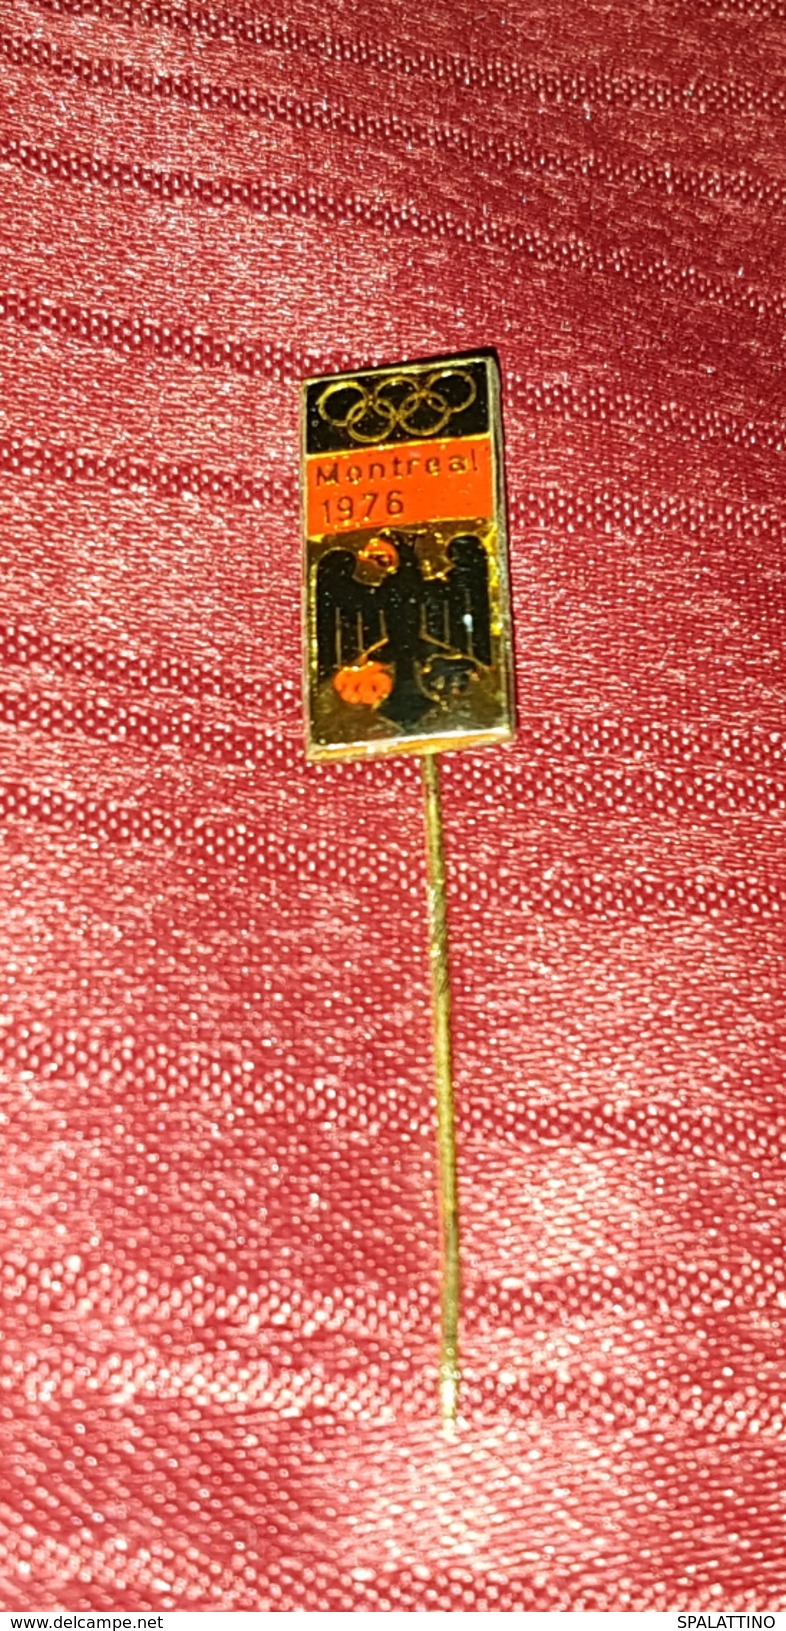 OLYMPIC GAMES IN MONTREAL 1976., GERMANY, DEUTSCHLAND OFFICIAL VINTAGE PIN BADGE - Olympic Games